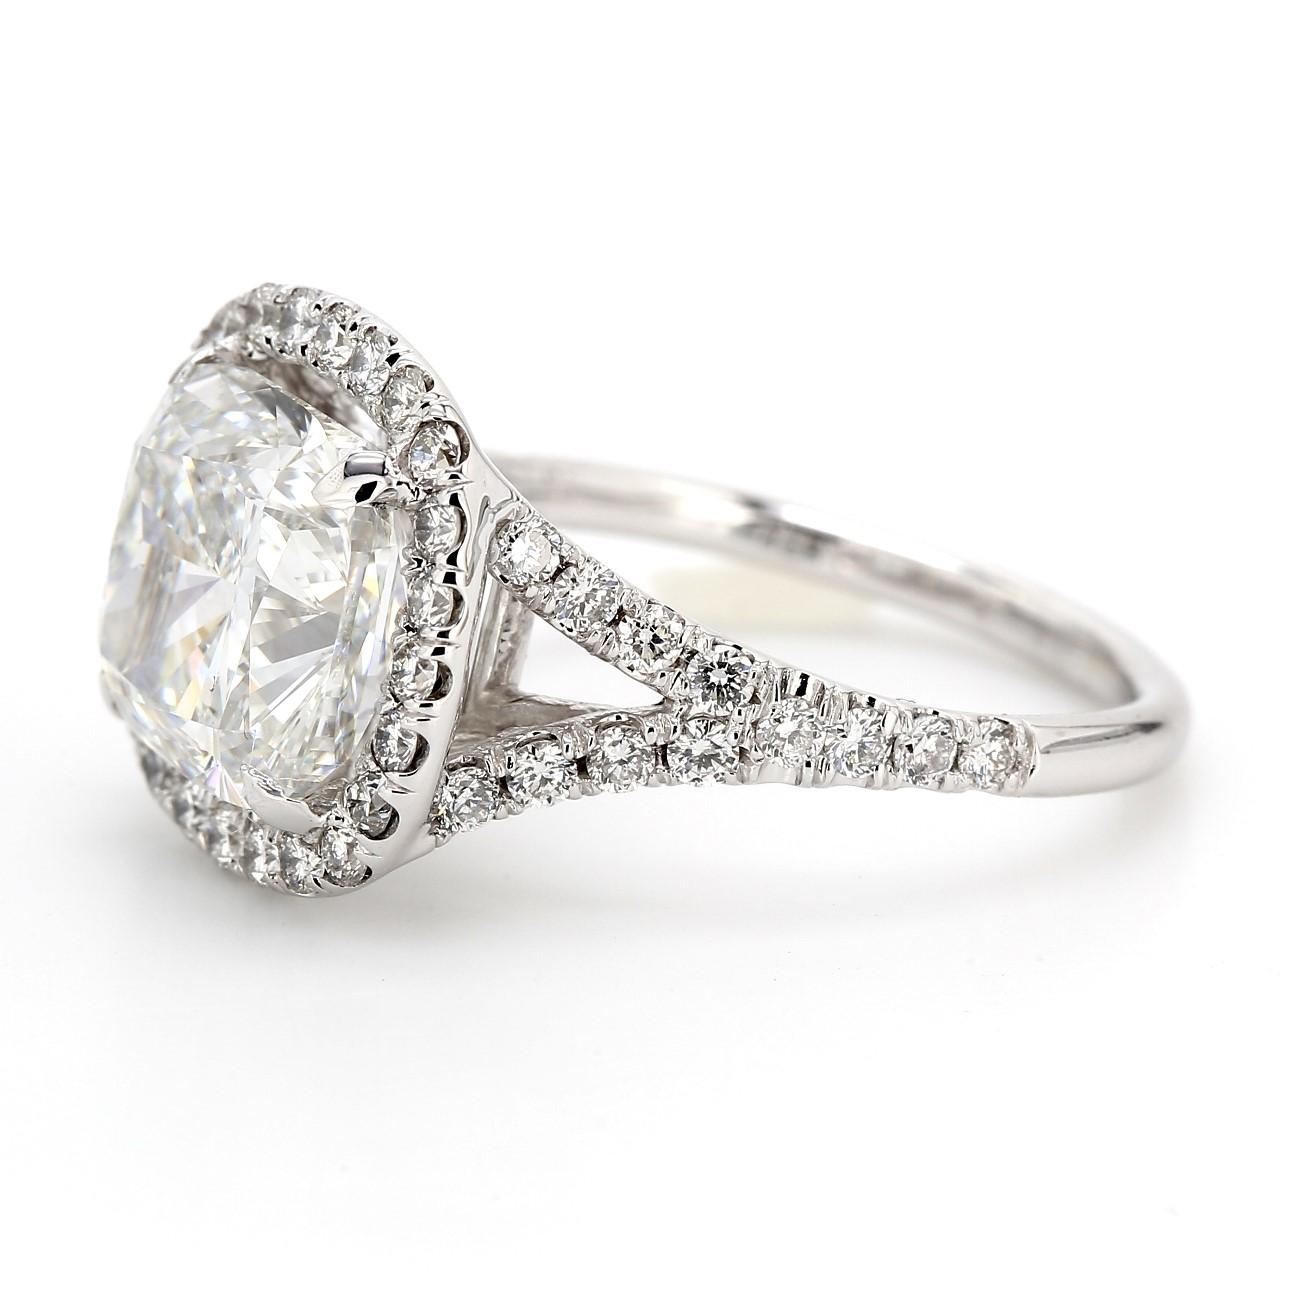 Halo split shank ring in 18K WG with U-prong set rounds around a 4-prong set GIA certified H/VS2 cushion cut diamond center.  D5.66ct.t.w.  (Center 4.83ct.)  Size 6.5